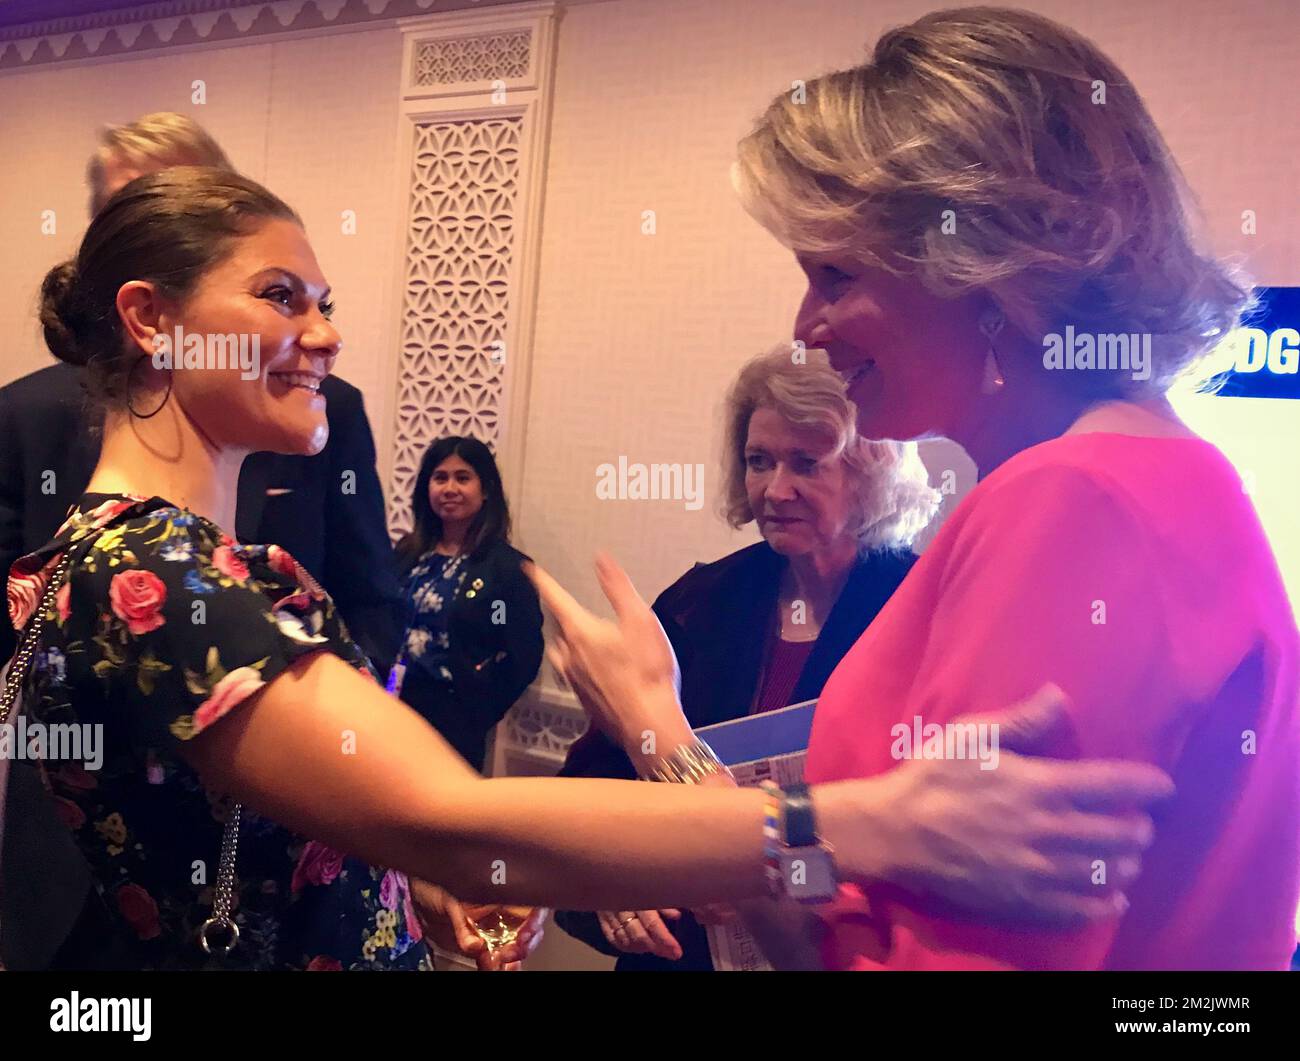 Crown Princess Victoria of Sweden meets with Queen Mathilde of Belgium during 20th Anniversary Schwab Foundation reception in marge of the 73th session of the United Nations General Assembly (UNGA 73), in New York City, United States of America, Sunday 23 September 2018. BELGA PHOTO ROYAL PALACE / RAFIKE YILMAZ / BENOIT DOPPAGNE Stock Photo